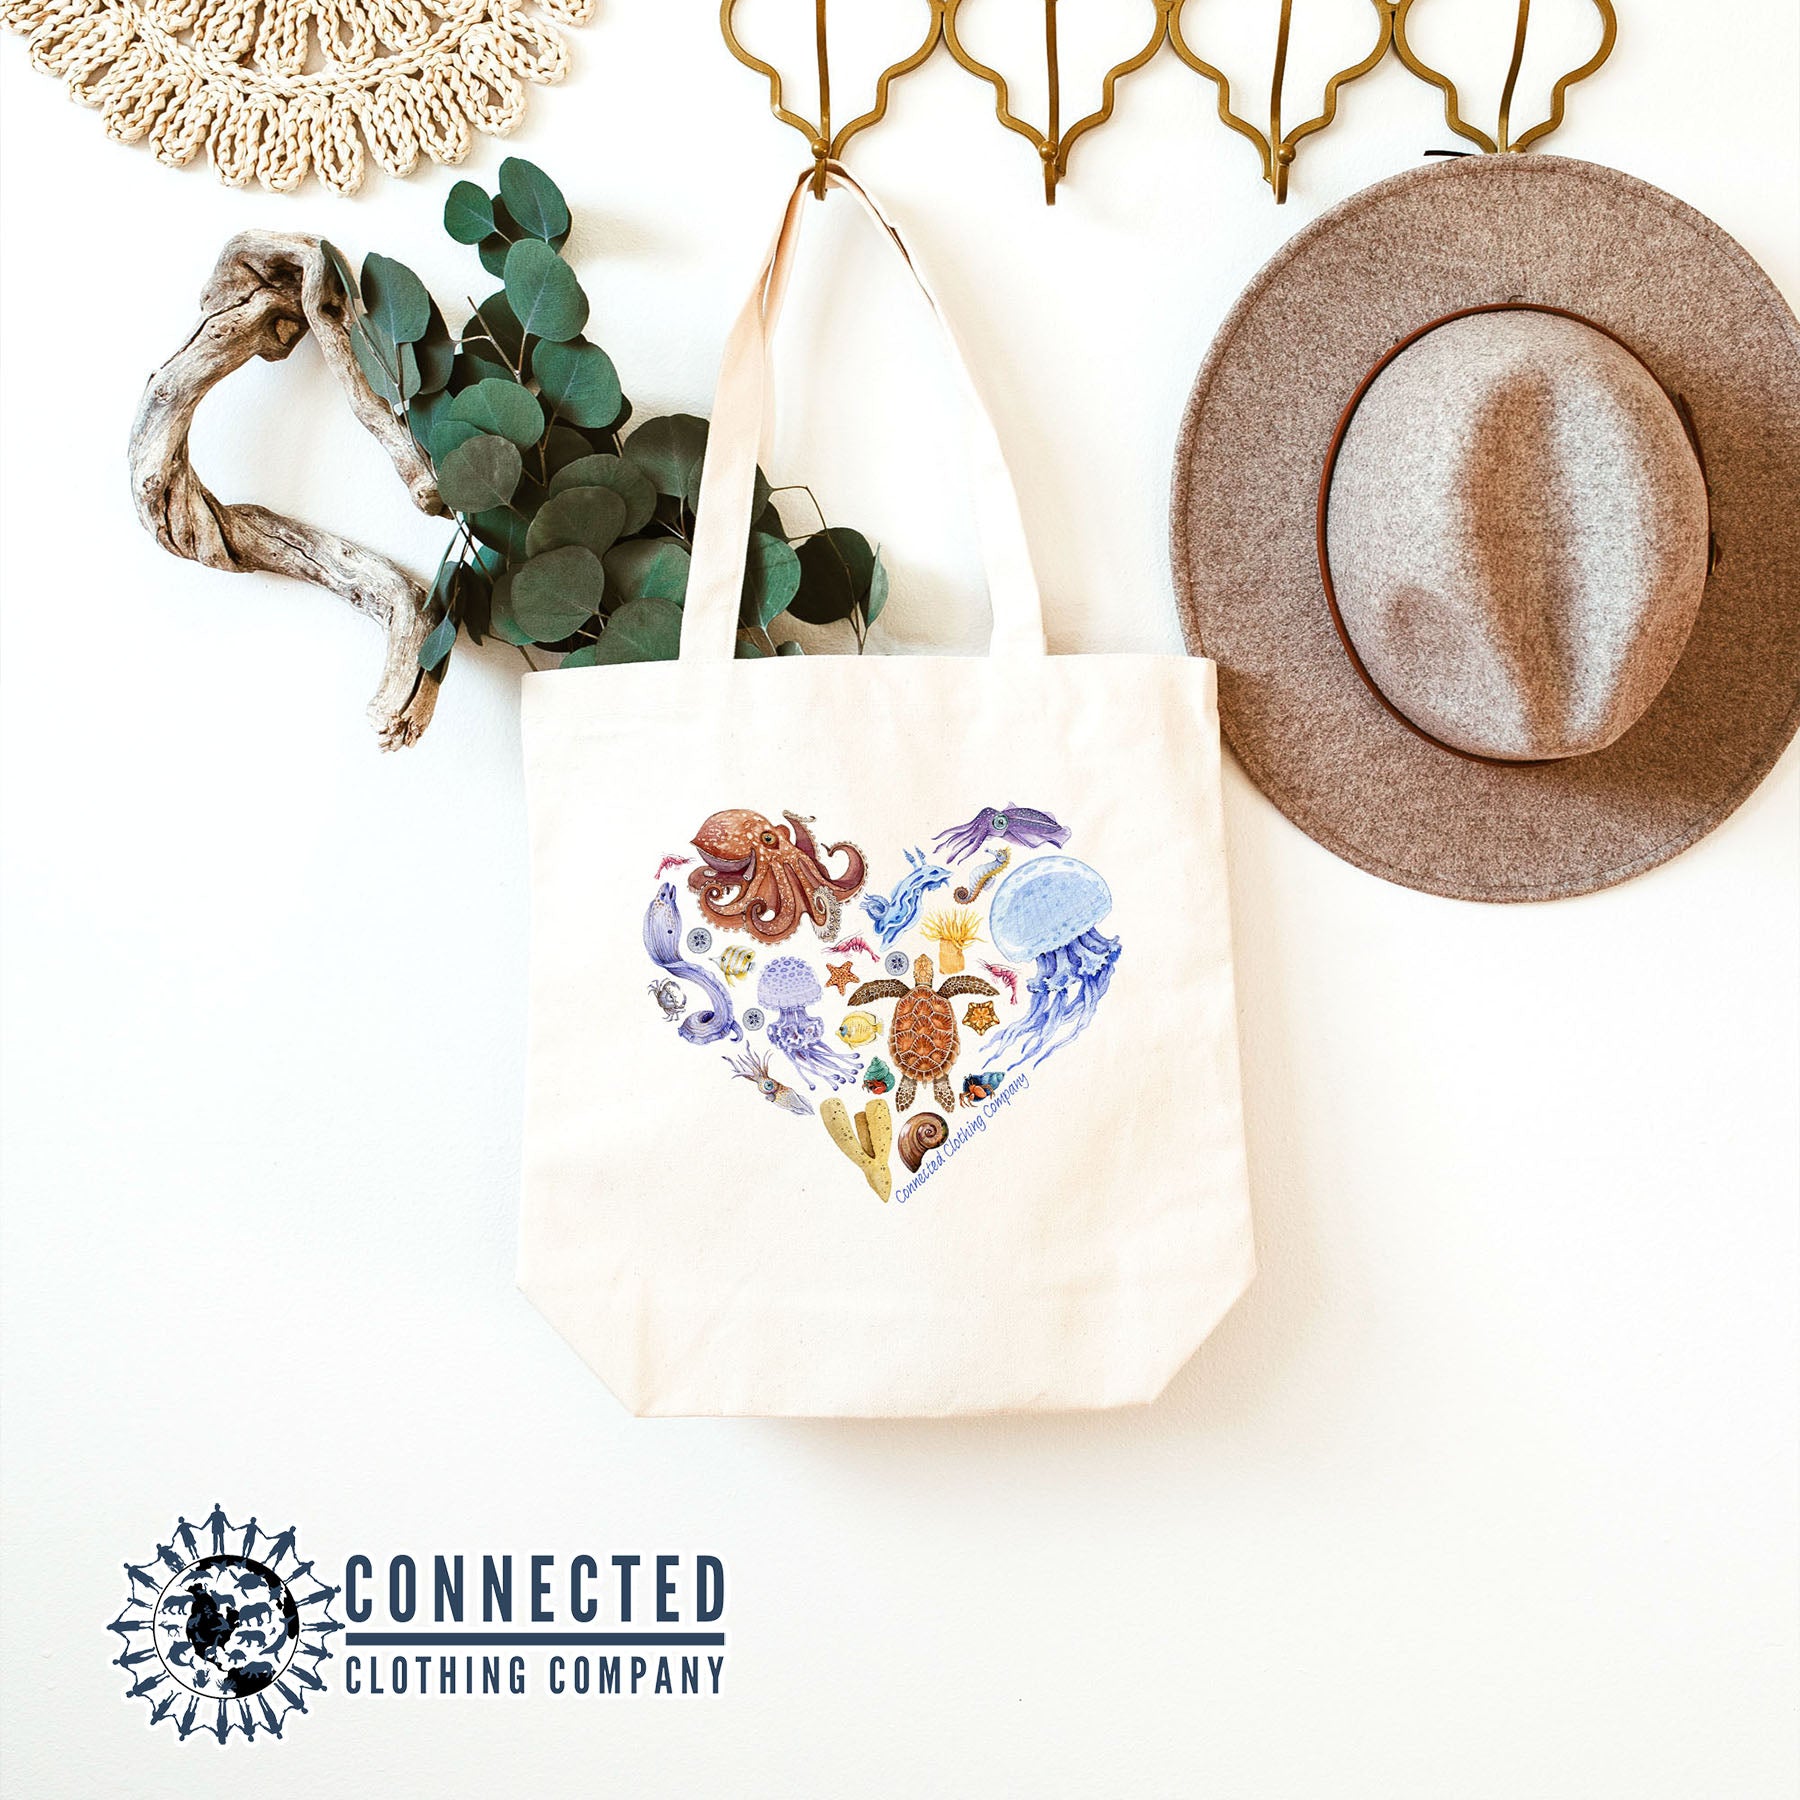 Heart Ocean Sea Creatures Tote Bag - Connected Clothing Company - 10% of proceeds donated to ocean conservation